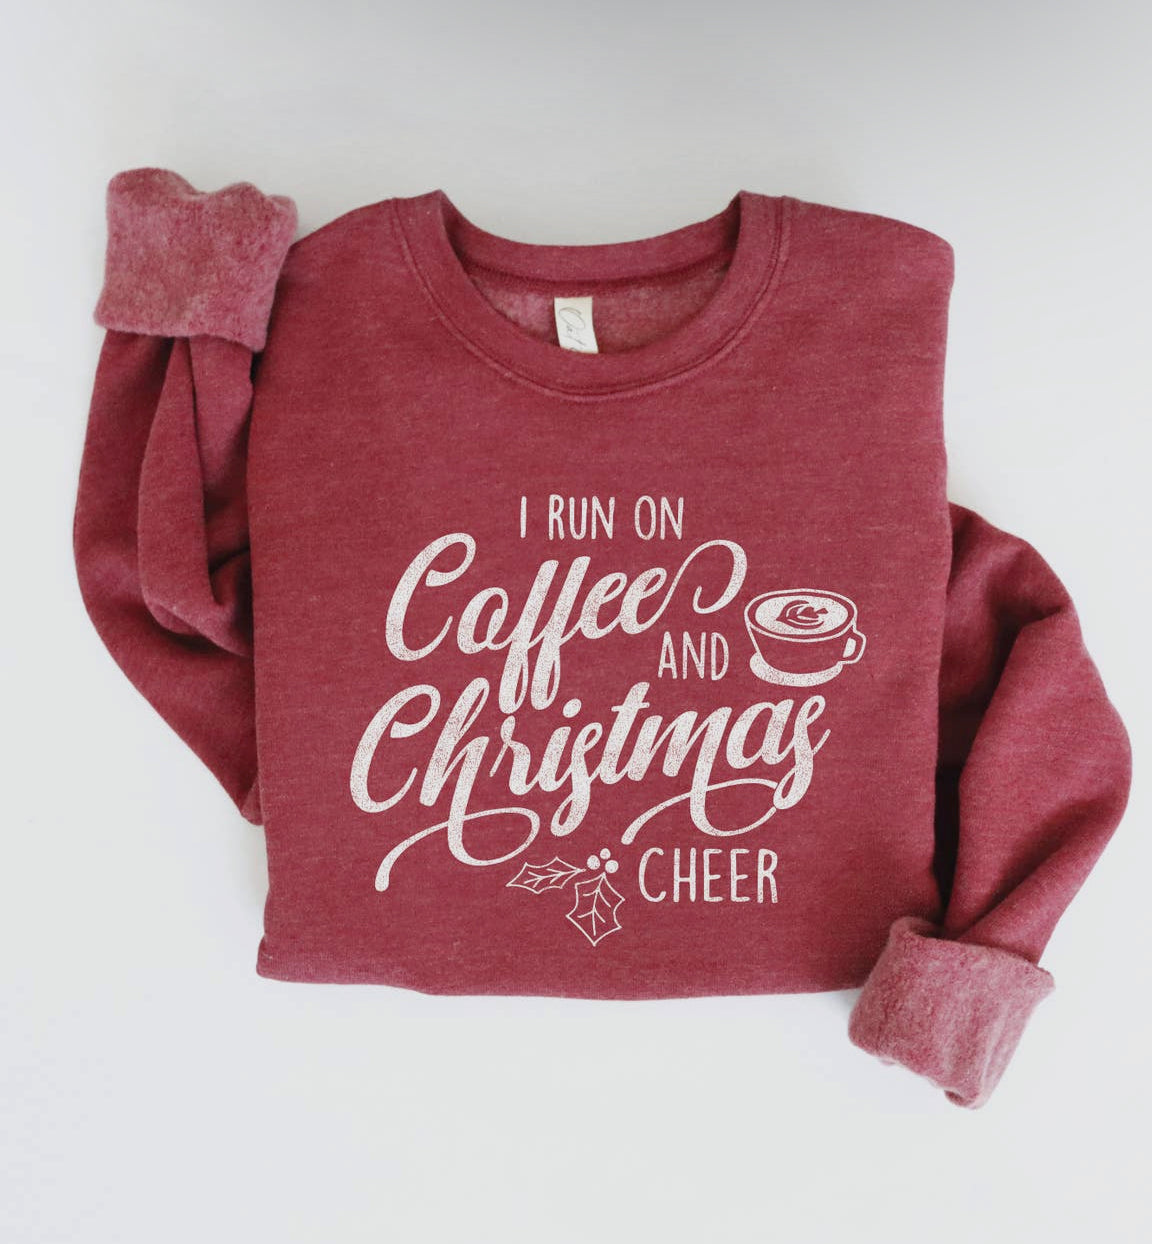 I Run On Coffee and Christmas Cheer Graphic Sweatshirt by Oat Collective